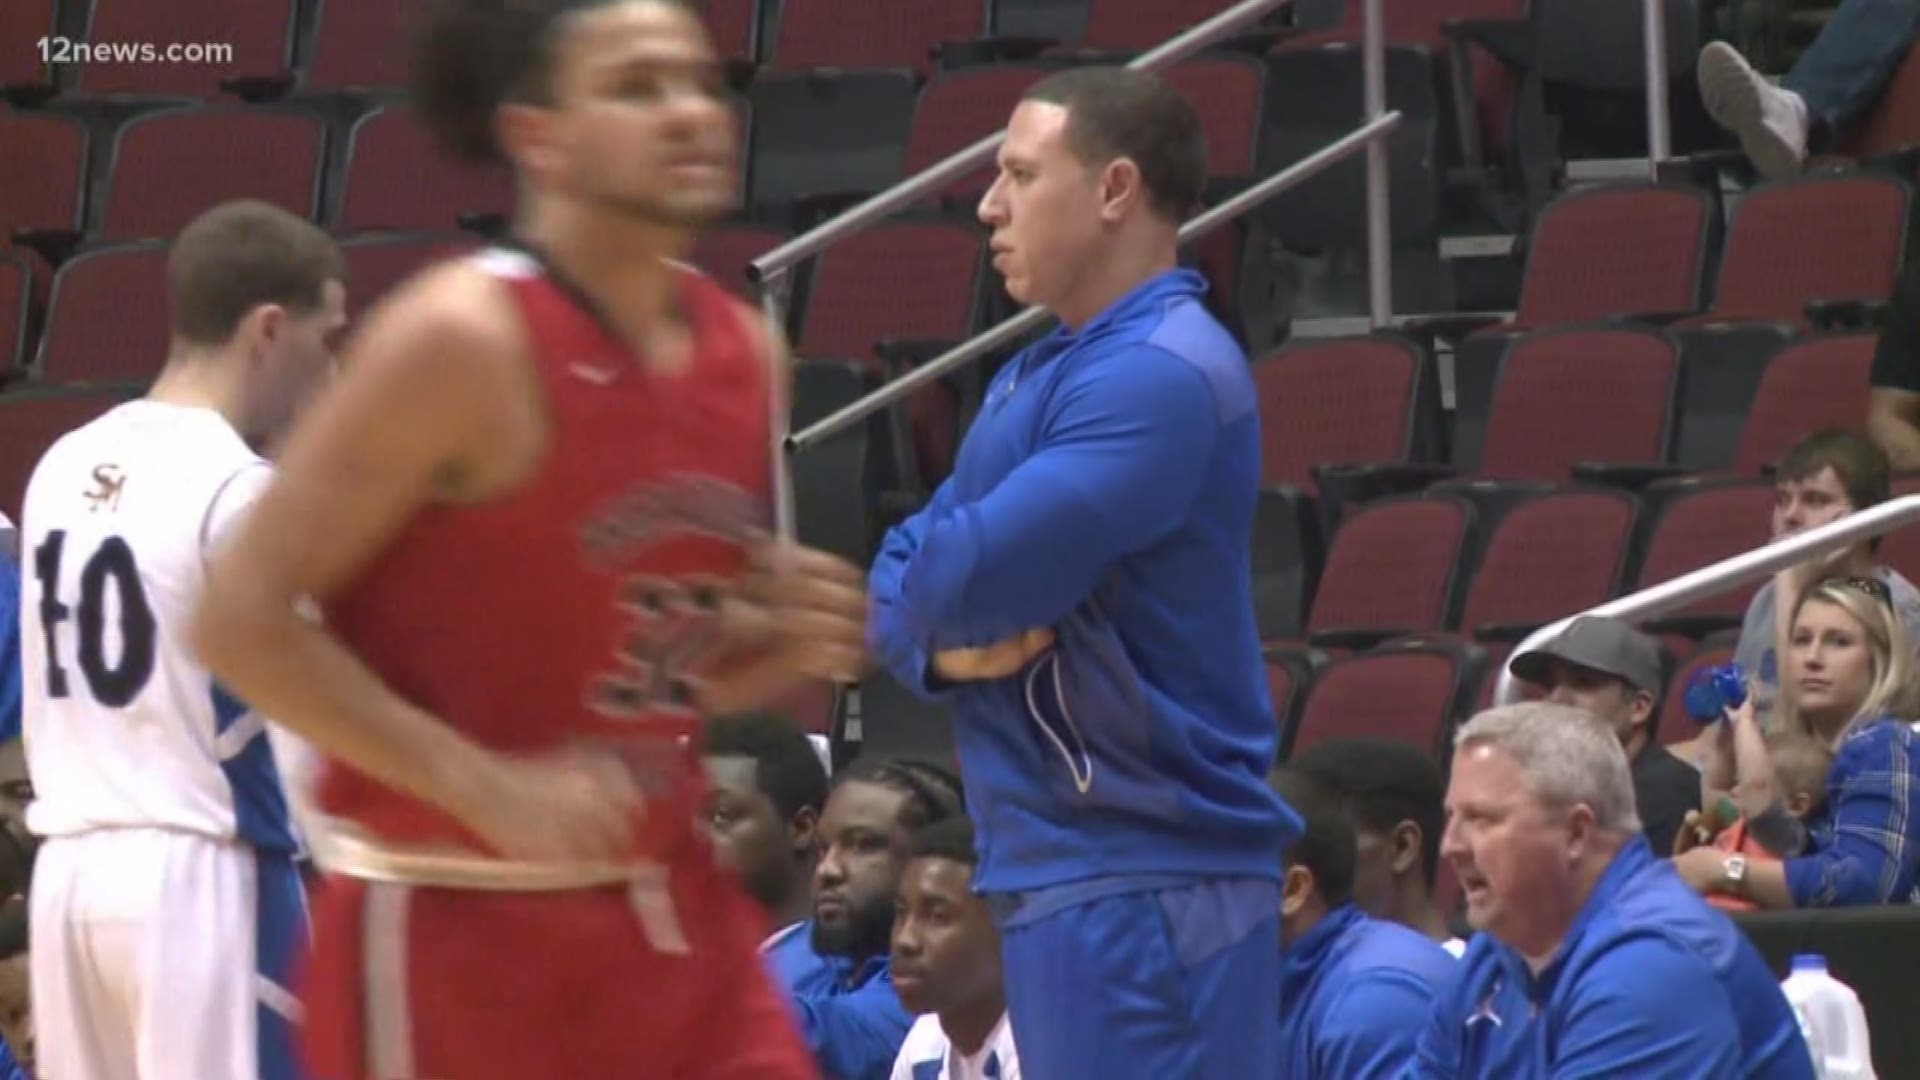 Former NBA star and current Shadow Mountain HS coach Mike Bibby faces an allegation of sexual abuse levied by a teacher at the school, court documents show.